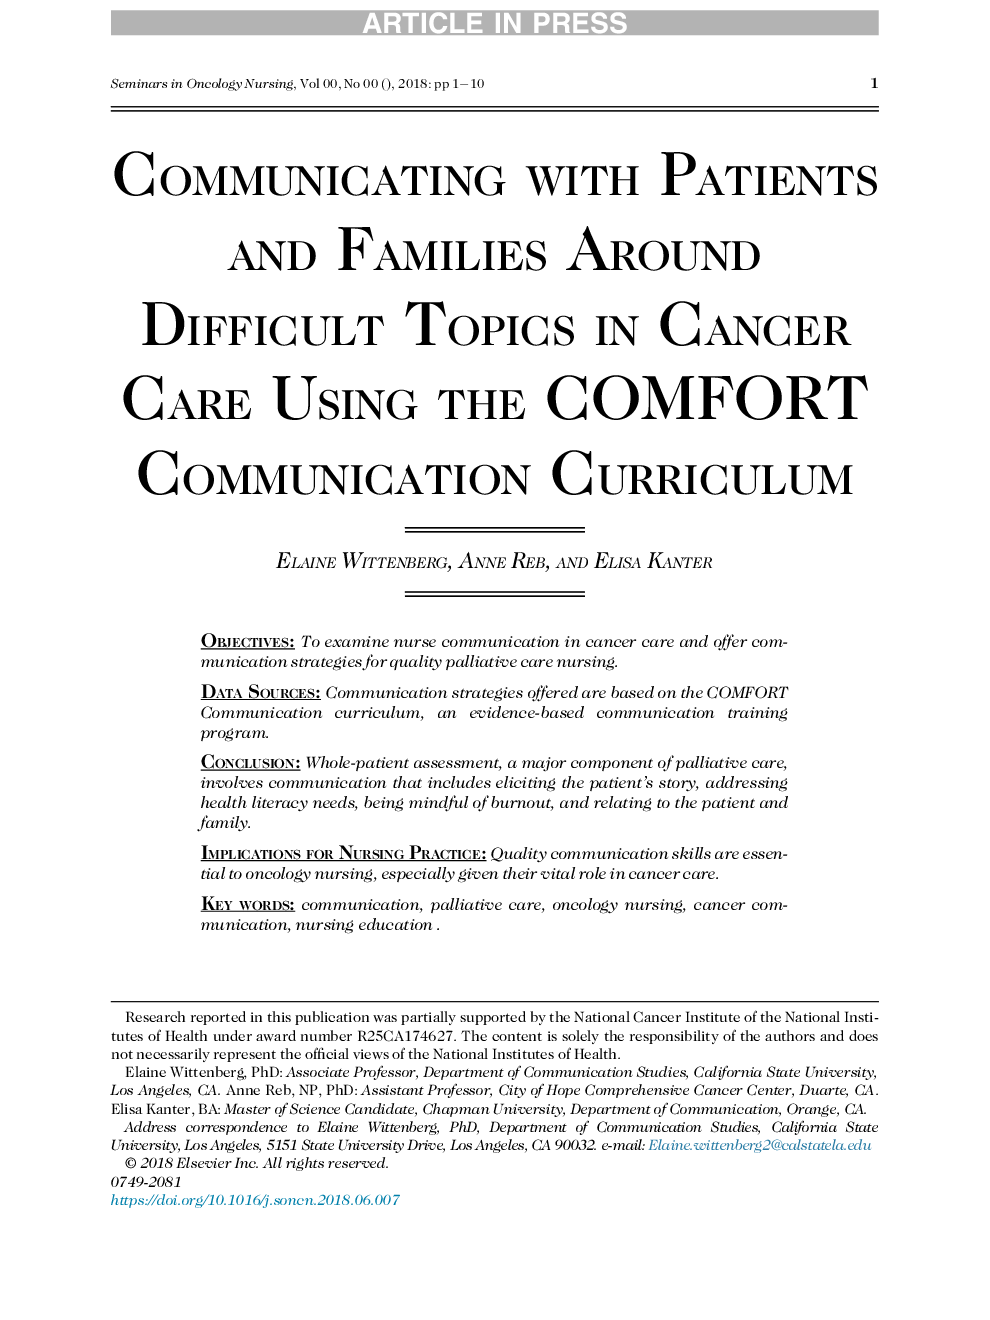 Communicating with Patients and Families Around Difficult Topics in Cancer Care Using the COMFORT Communication Curriculum